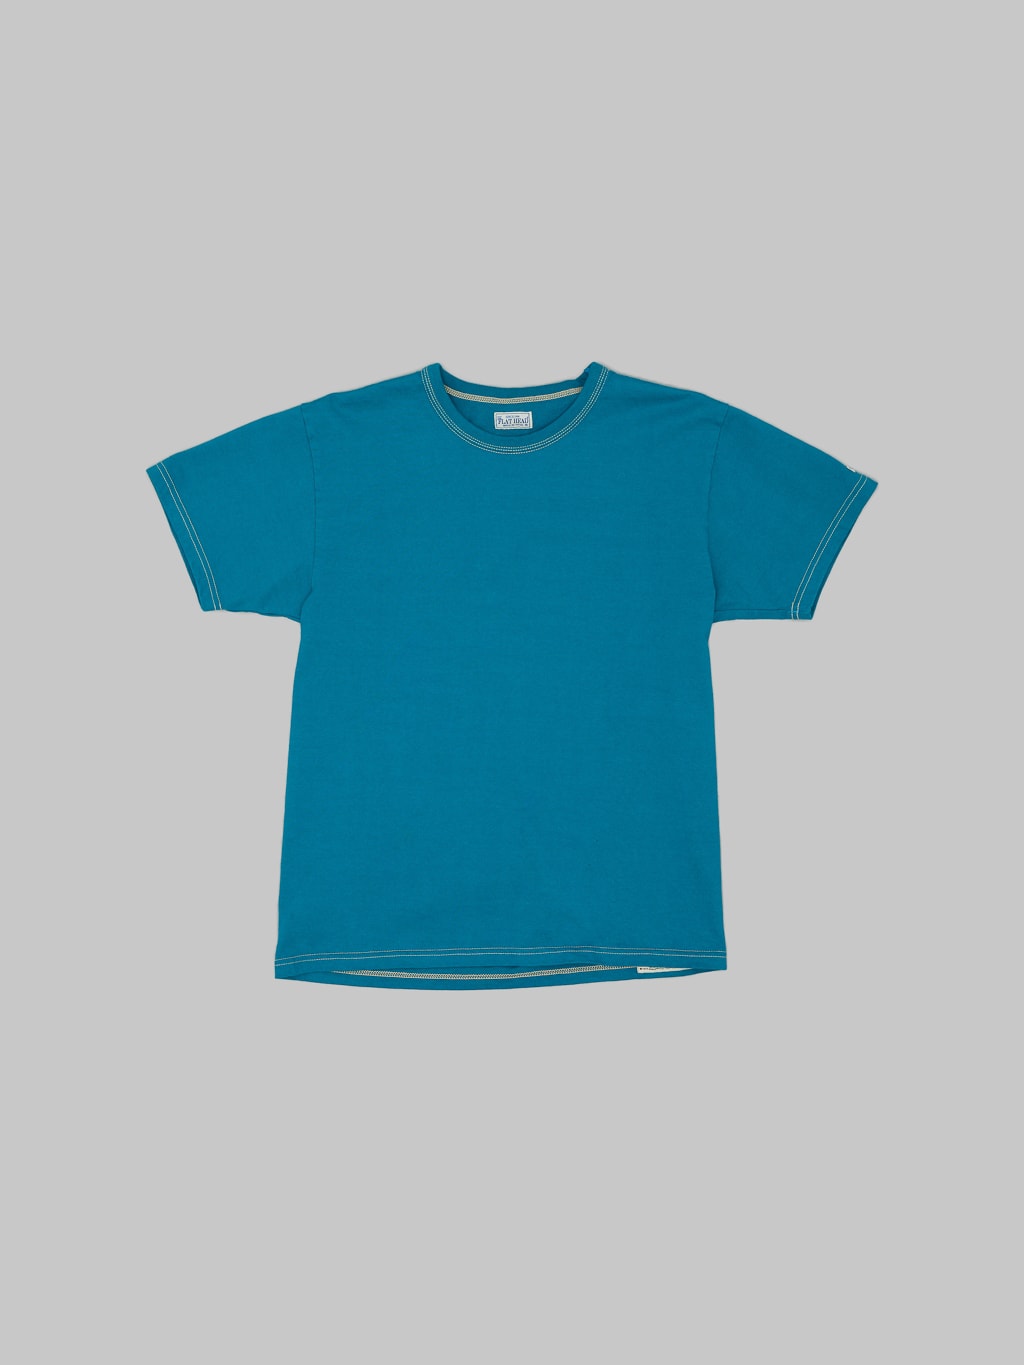 The Flat Head Plain Heavyweight TShirt turquoise front